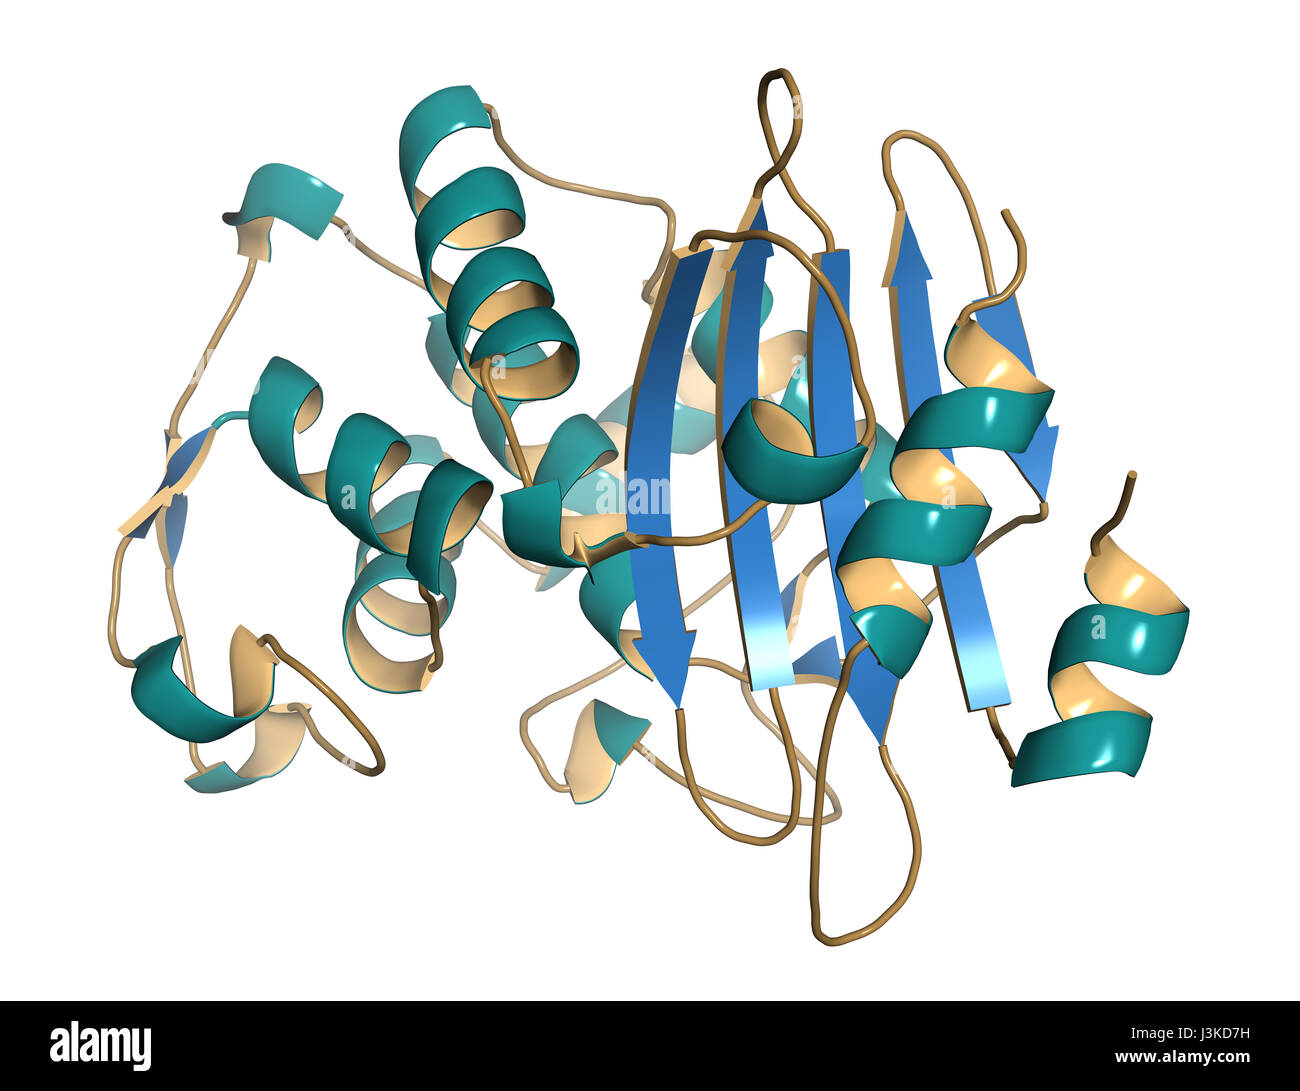 Beta-lactamase enzyme from Staphylococcus aureus. Responsible for resistance against penicillin and related antibiotics. Cartoon model, secondary stru Stock Photo